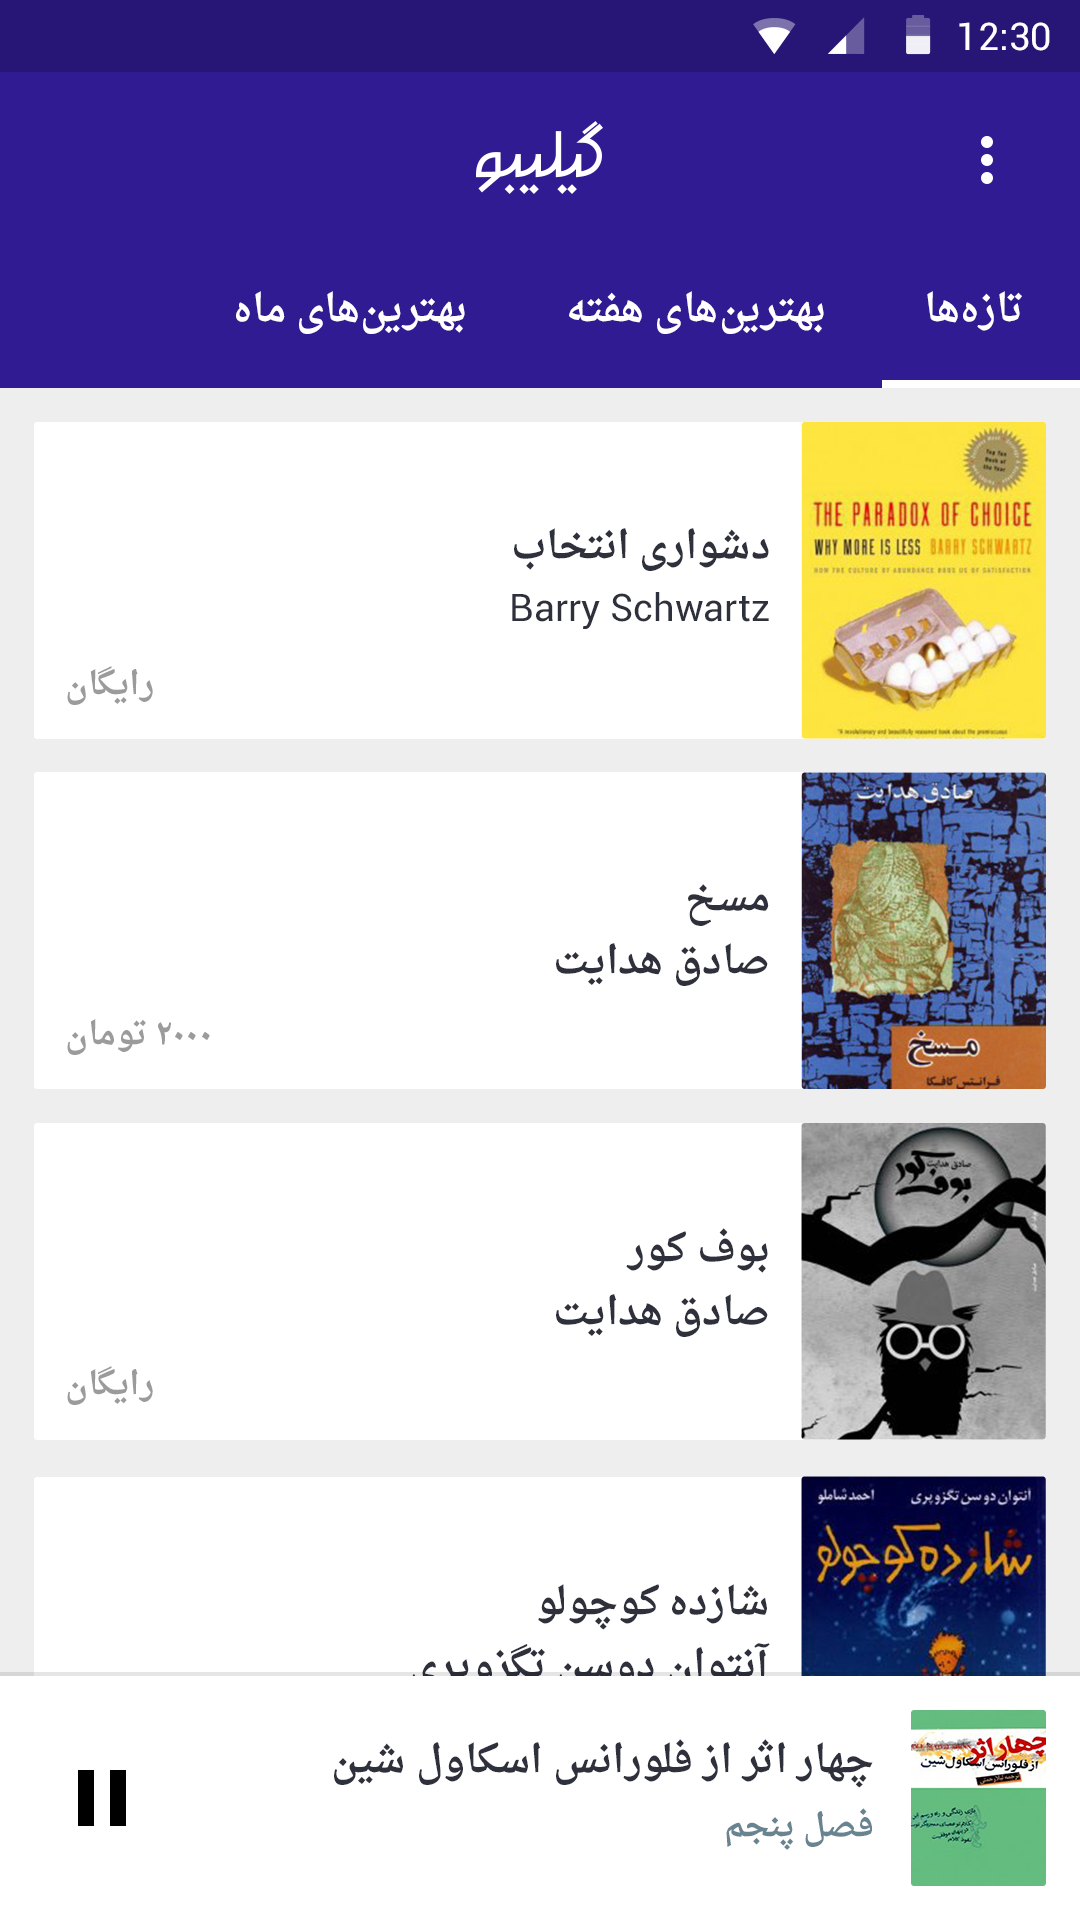 Gilibo for Android by Pouya Saadeghi - /projects/7ajMqoS4F4vNjleHUnBOKHCO6duZMc1M.png